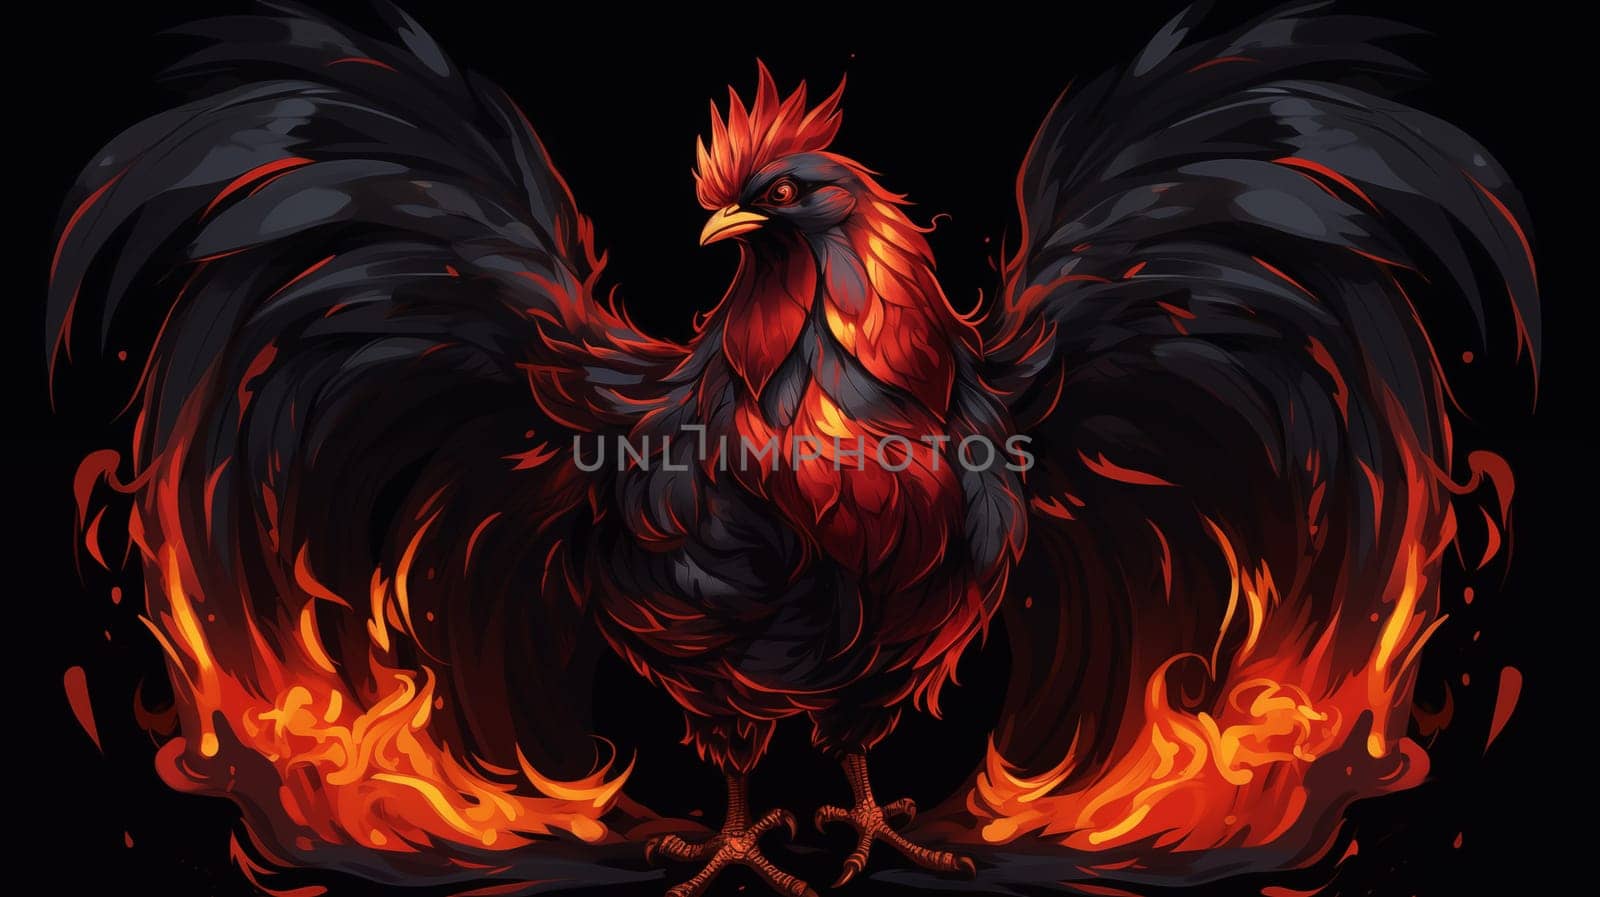 A black rooster stands on a fiery background, with his wings spread, on a black background, cartoon style.